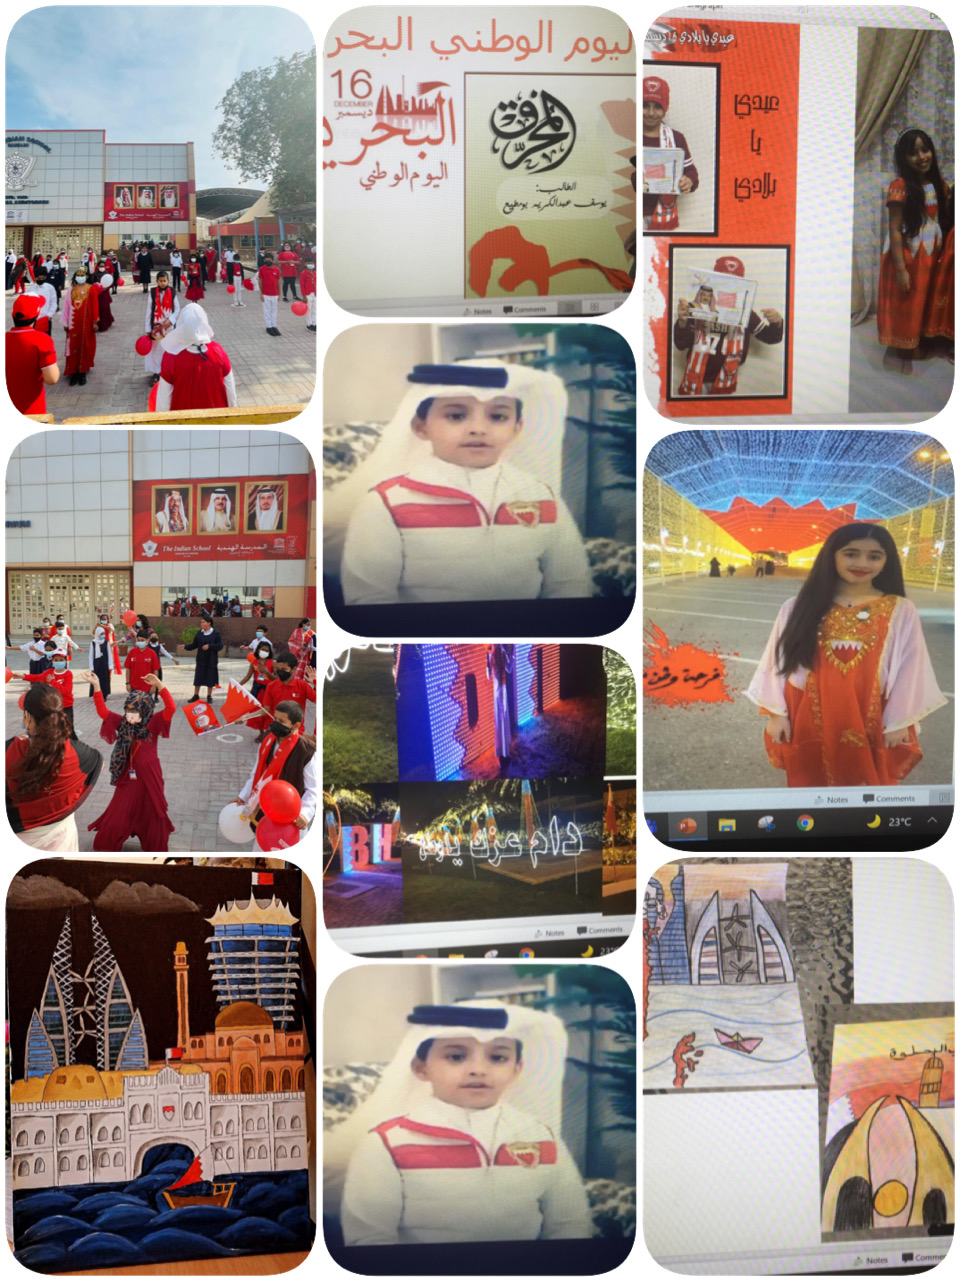 Indian School Isa Town Campus celebrates Bahrain National Day 